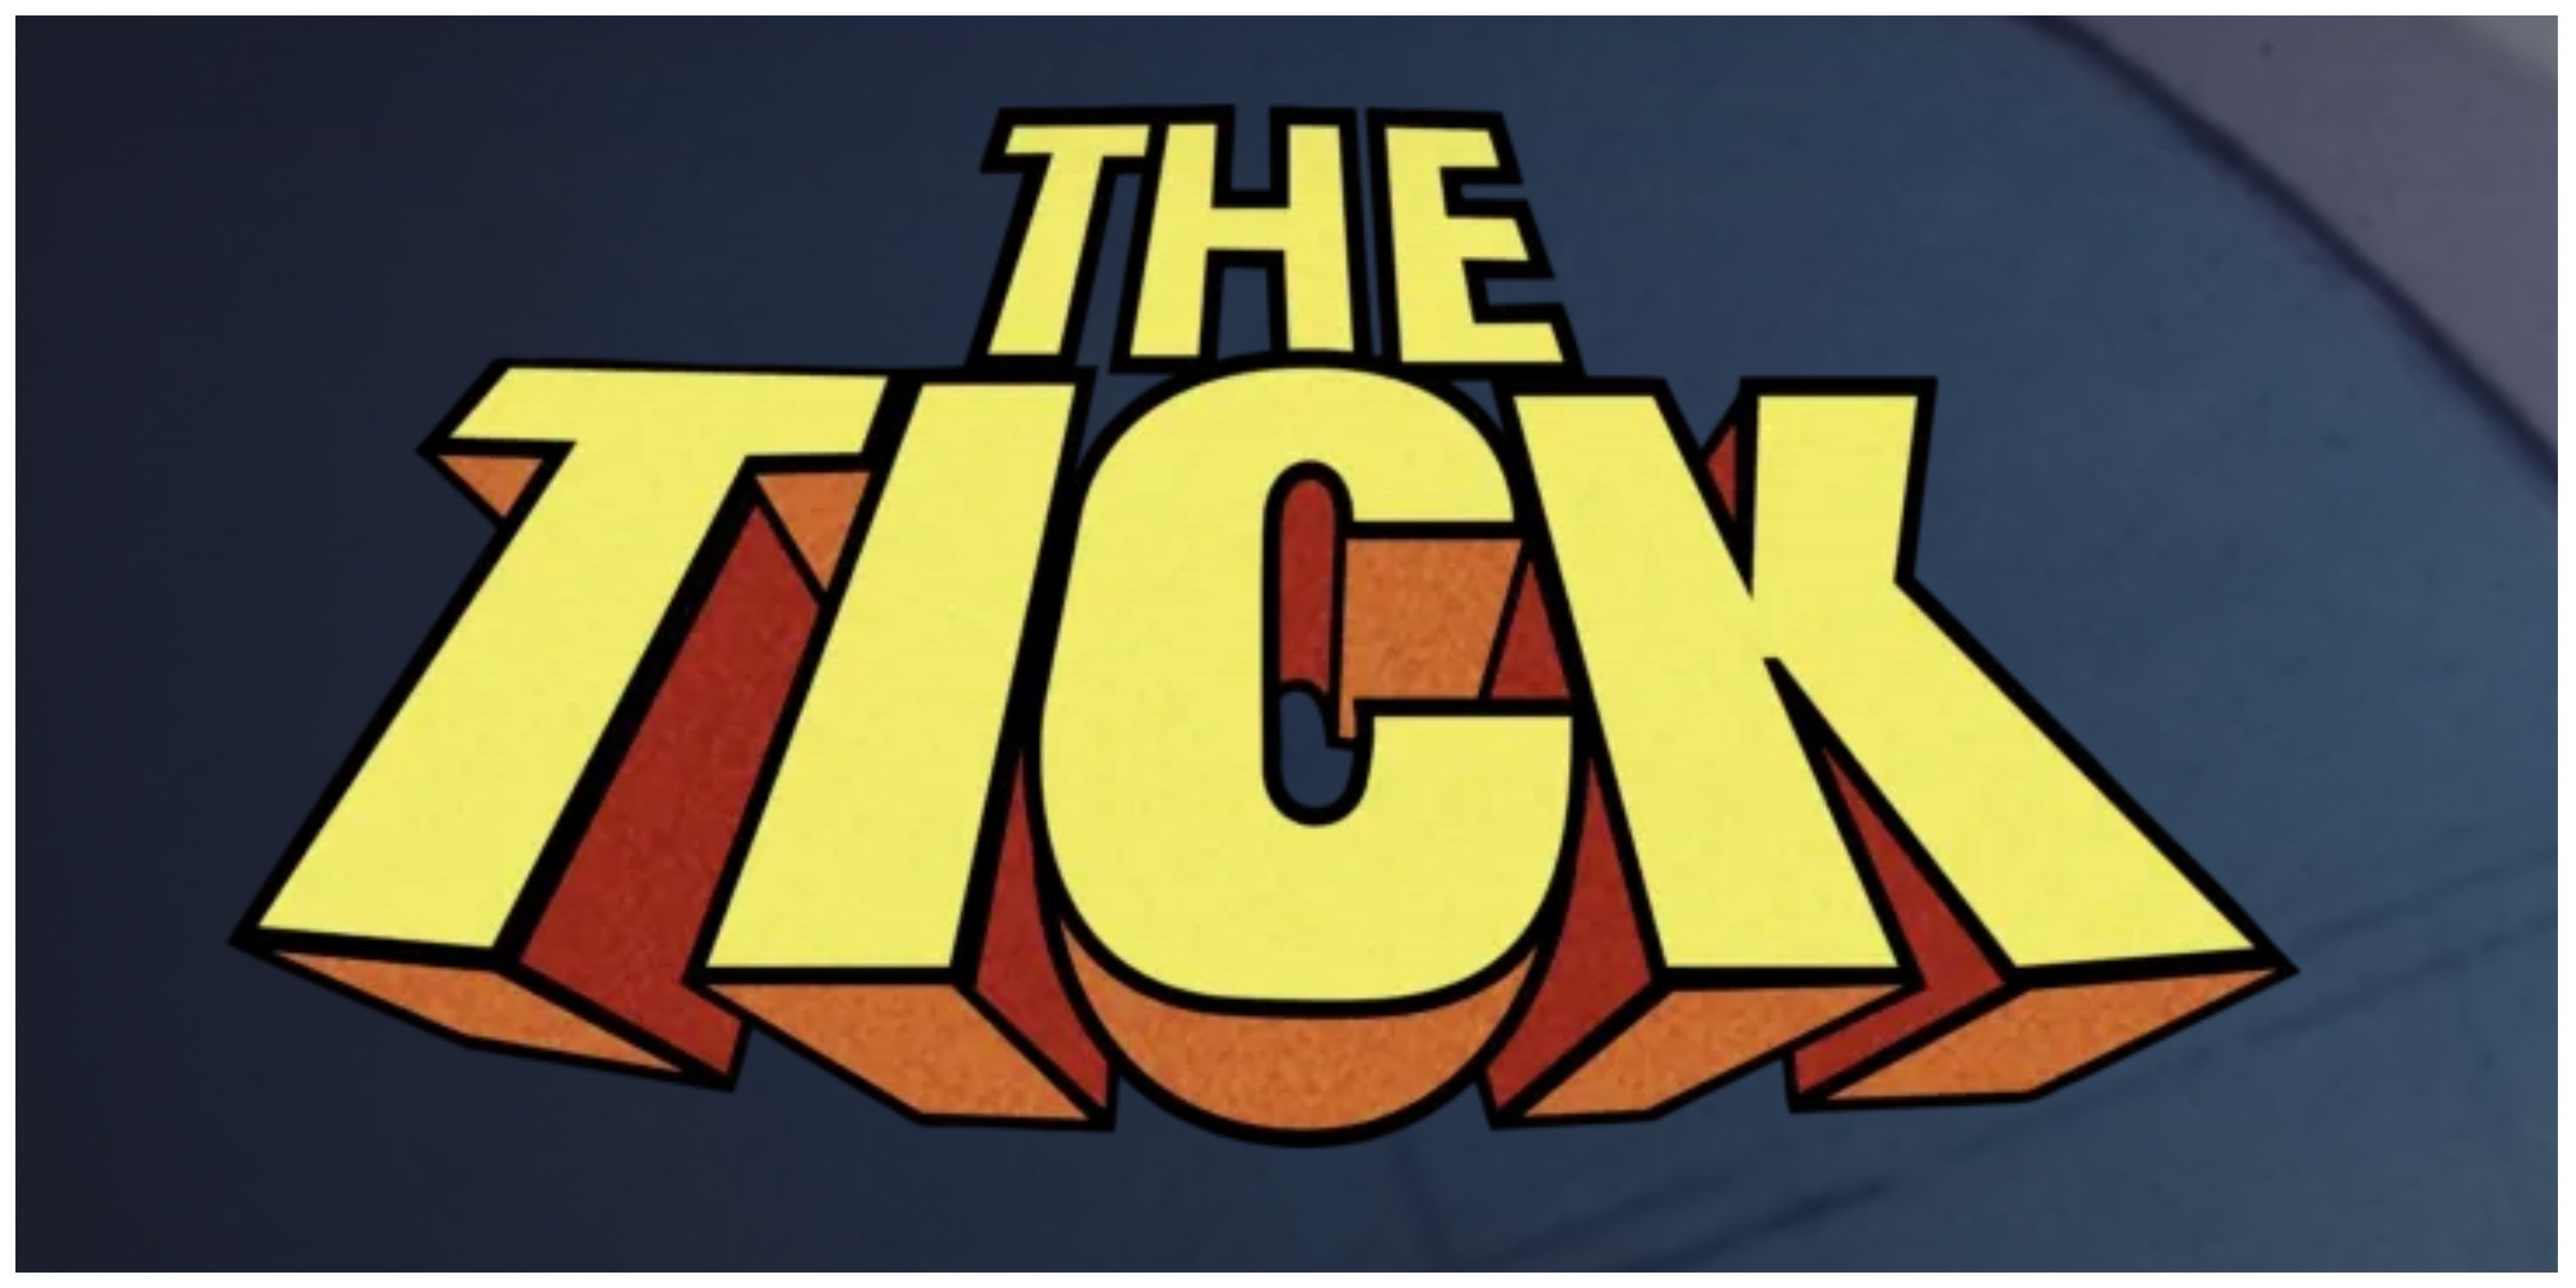 A yellow title logo for The Tick